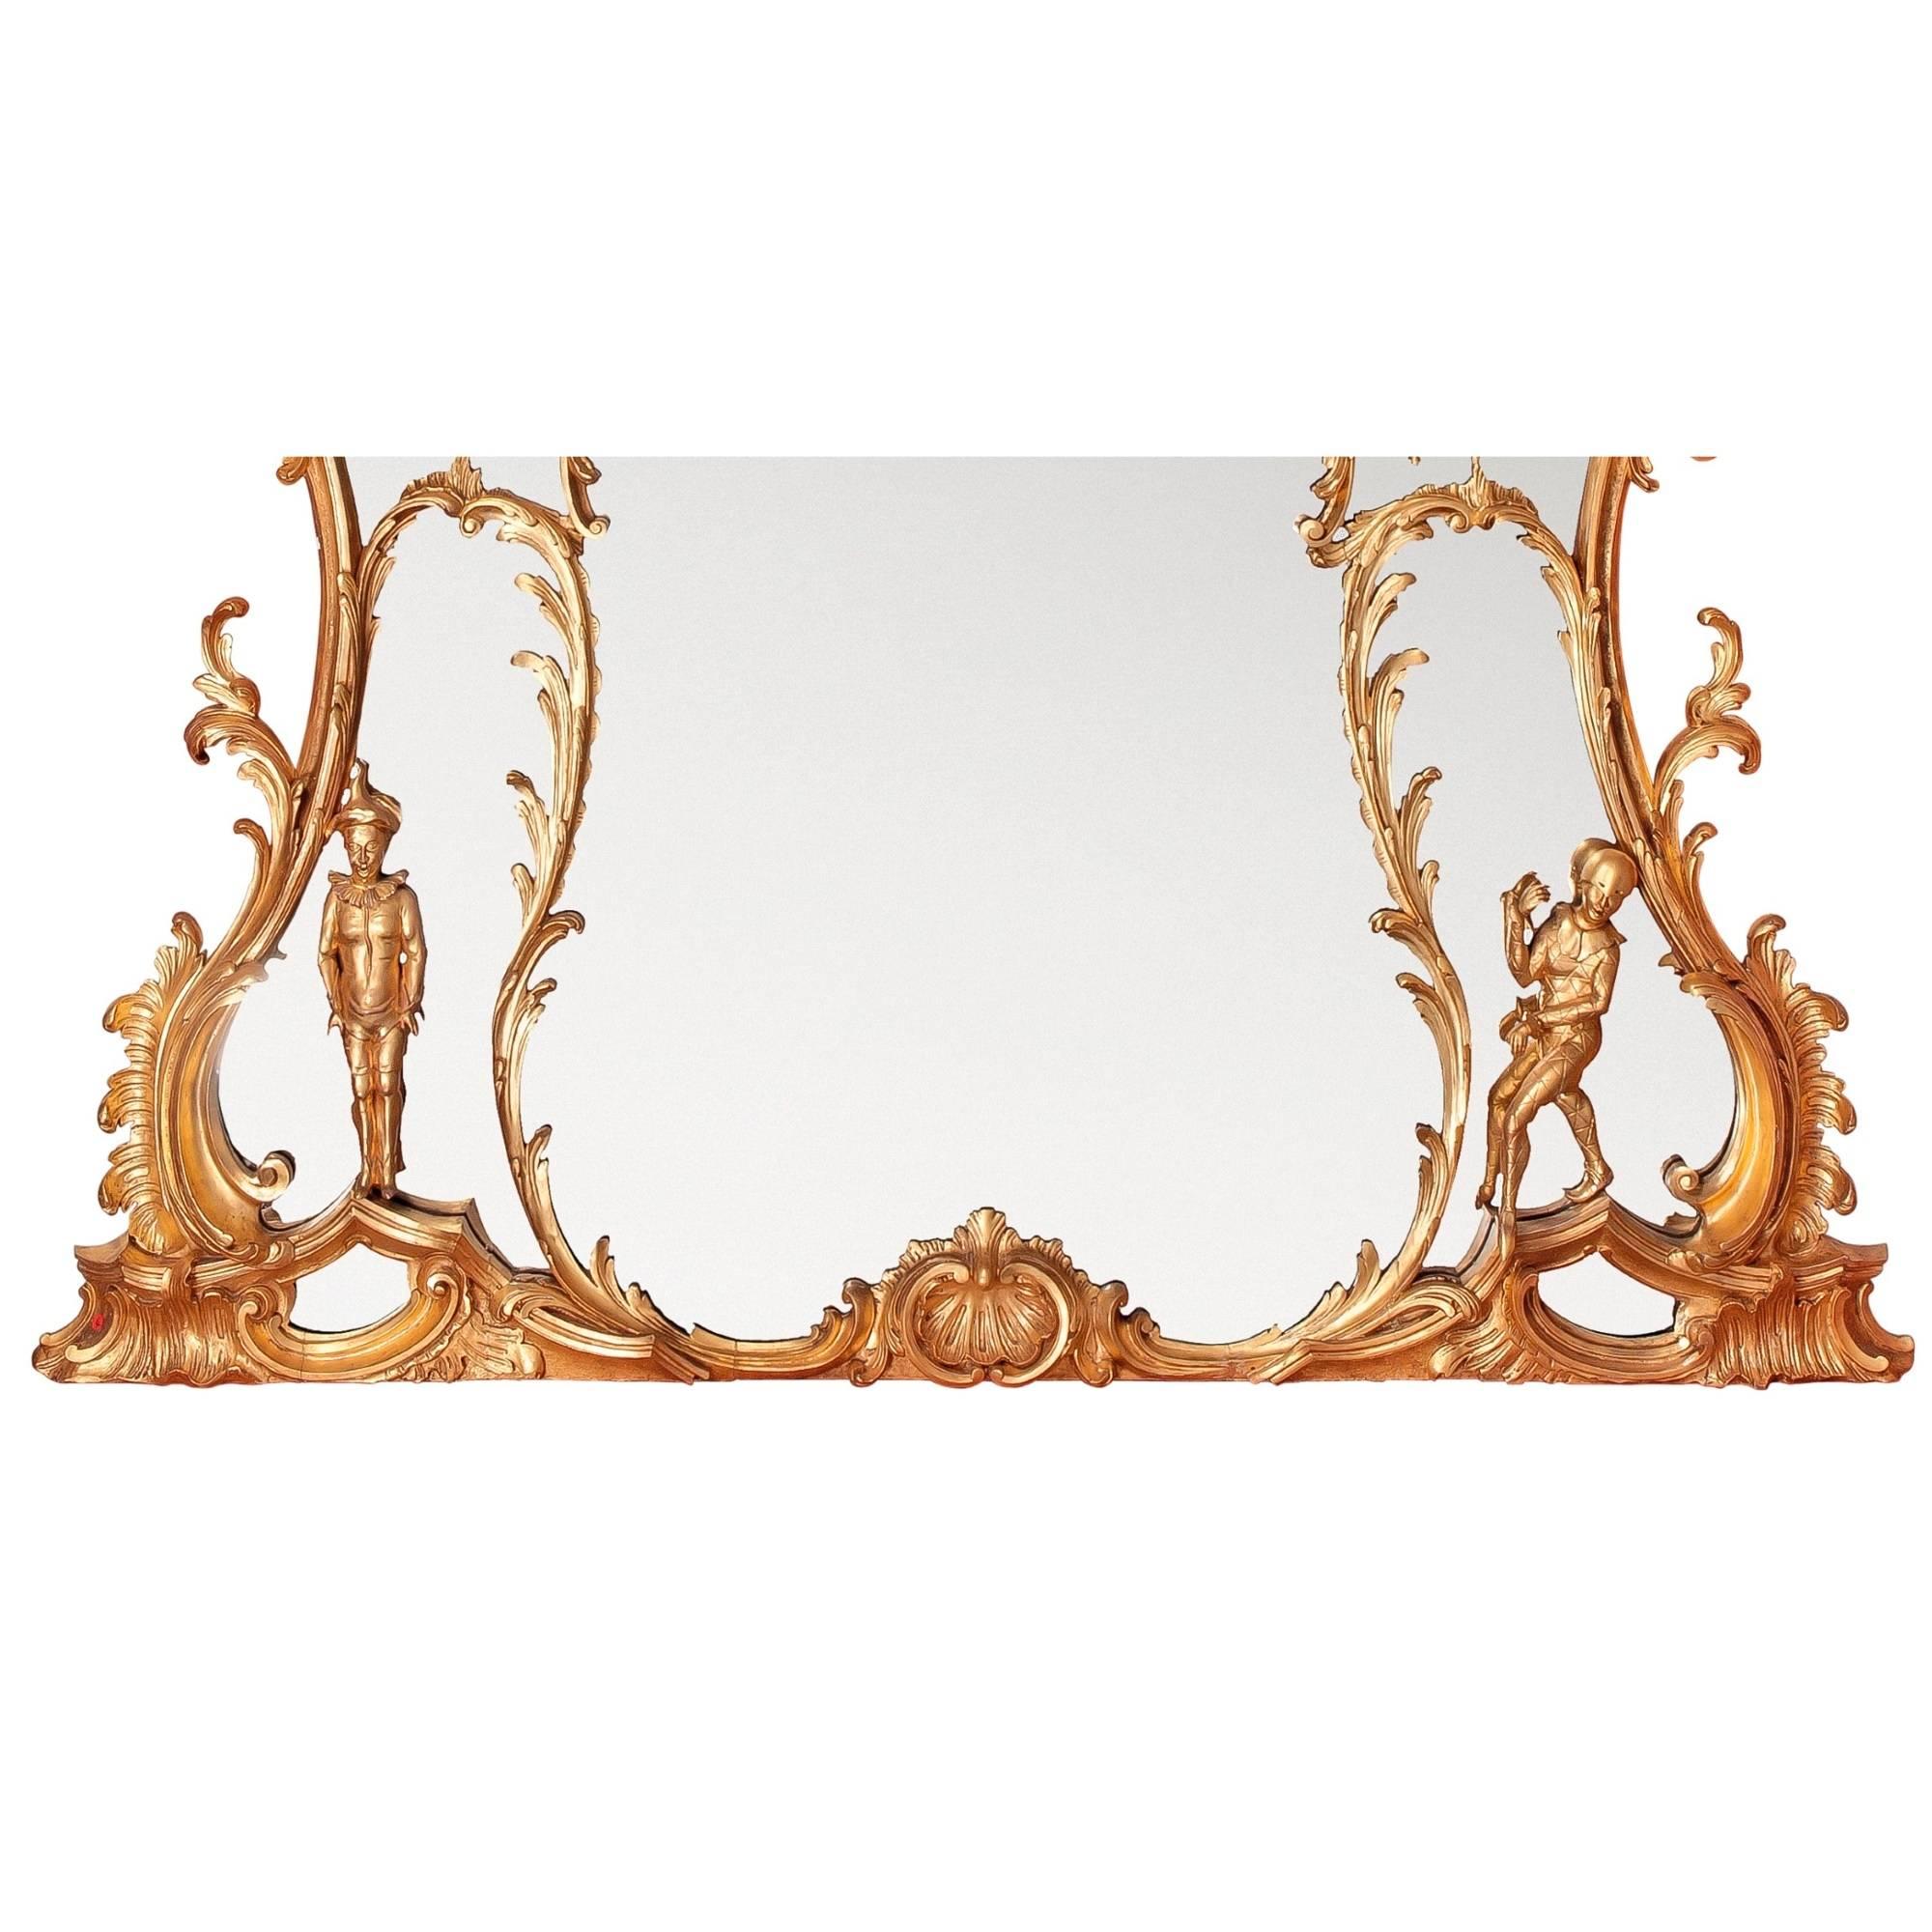 Mid-19th Century Large William IV period English gilt wood over-mantle mirror after Chippendale For Sale